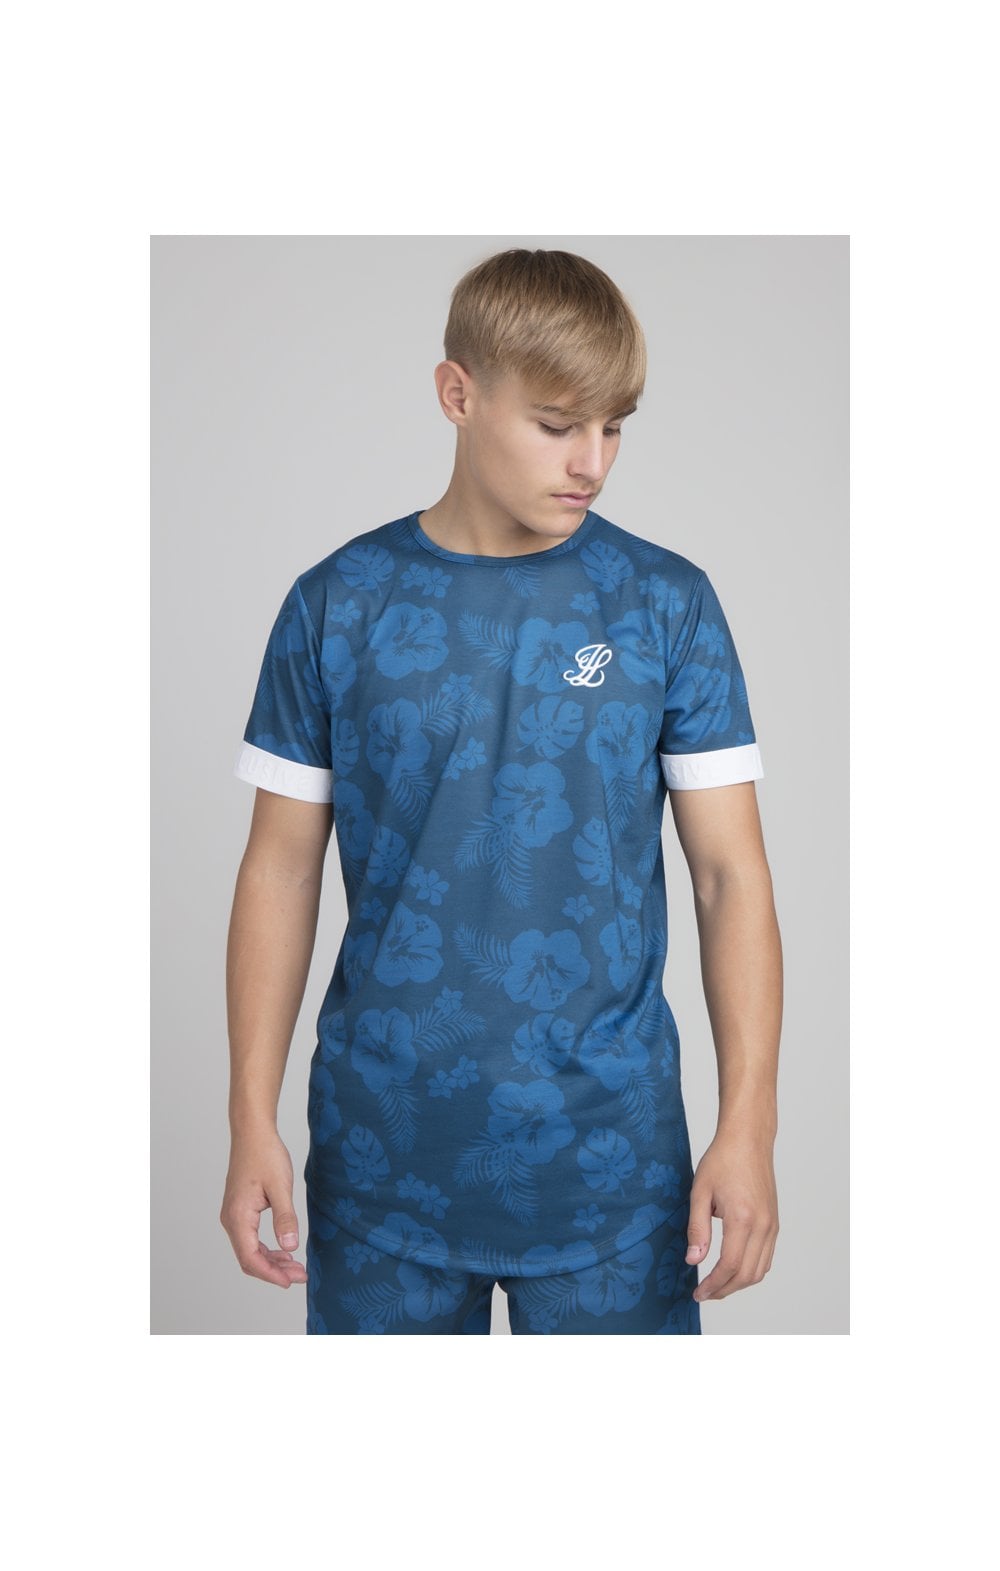 Load image into Gallery viewer, Boys Illusive Teal Floral T-Shirt